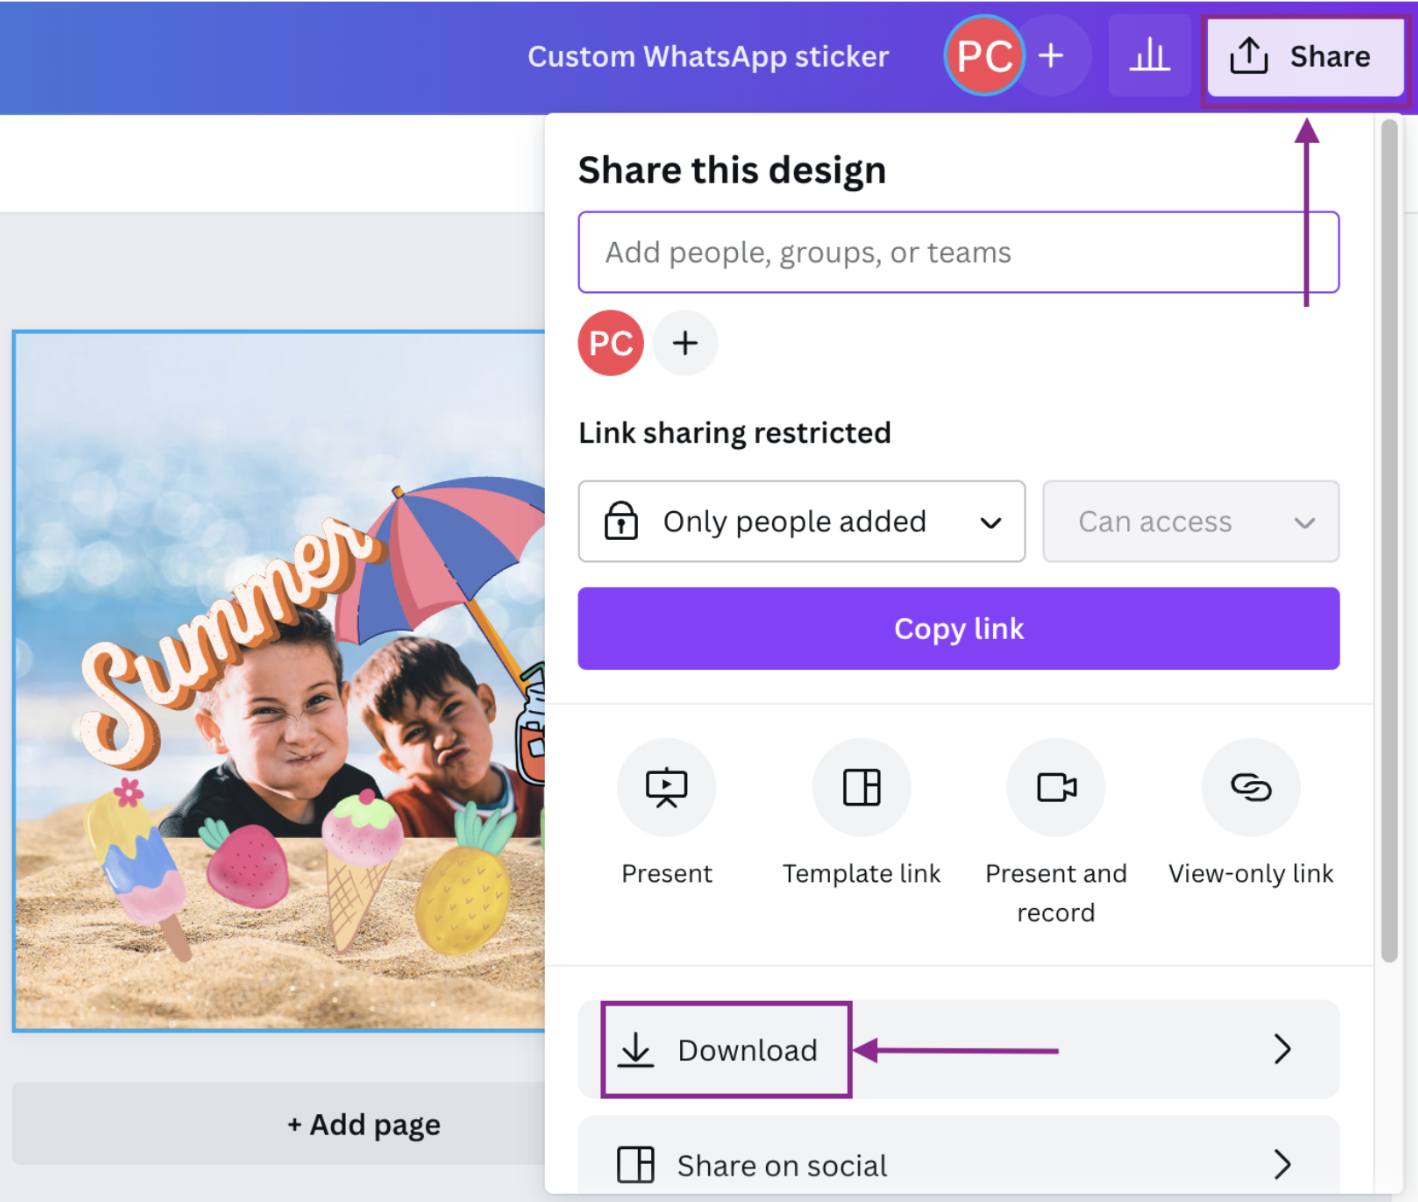 How to create WhatsApp Stickers in Canva